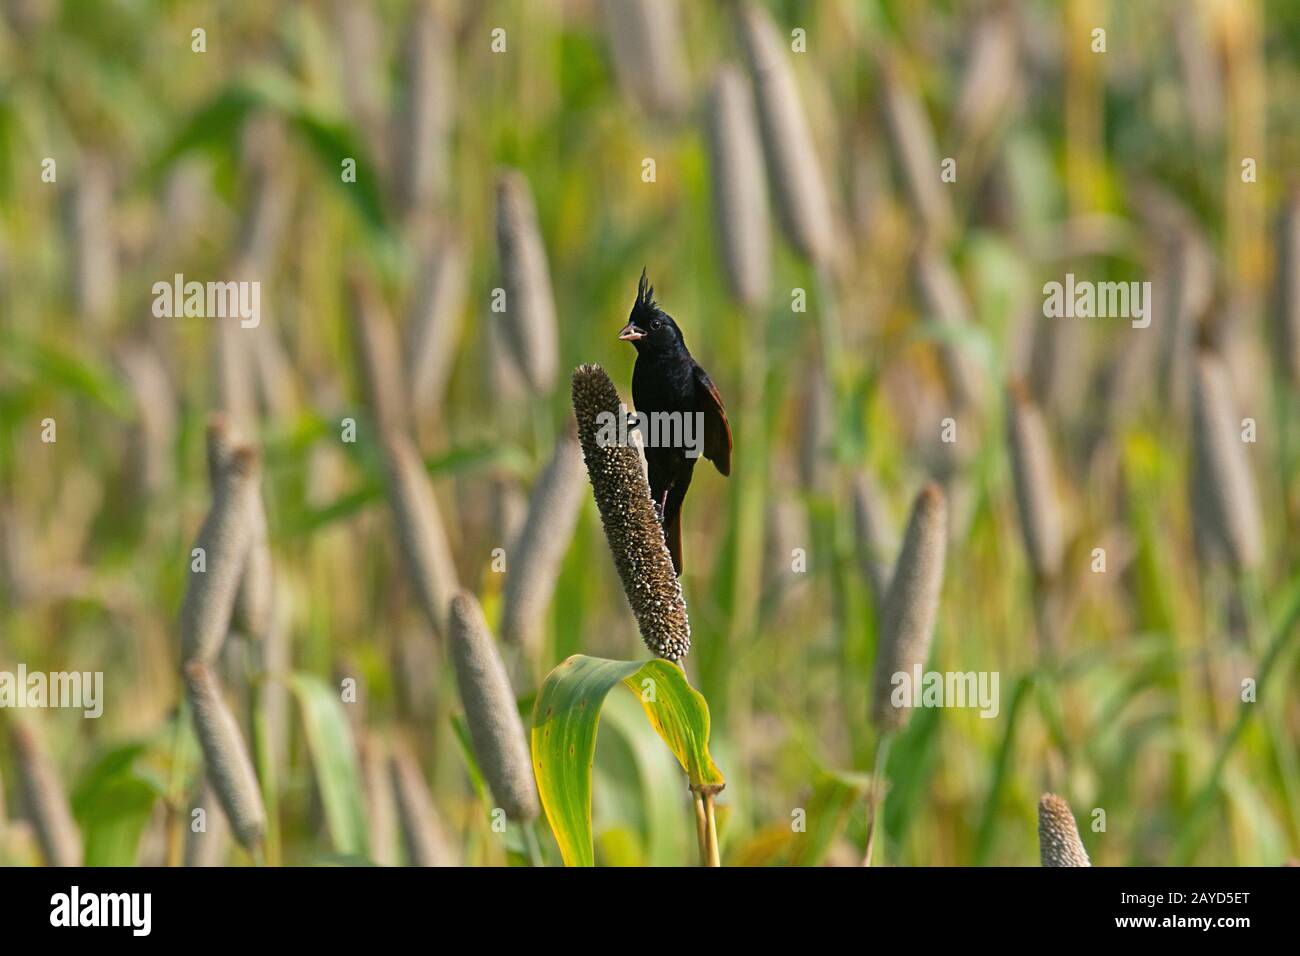 Crested Bunting, Melophus lathami eating bajra grains Stock Photo